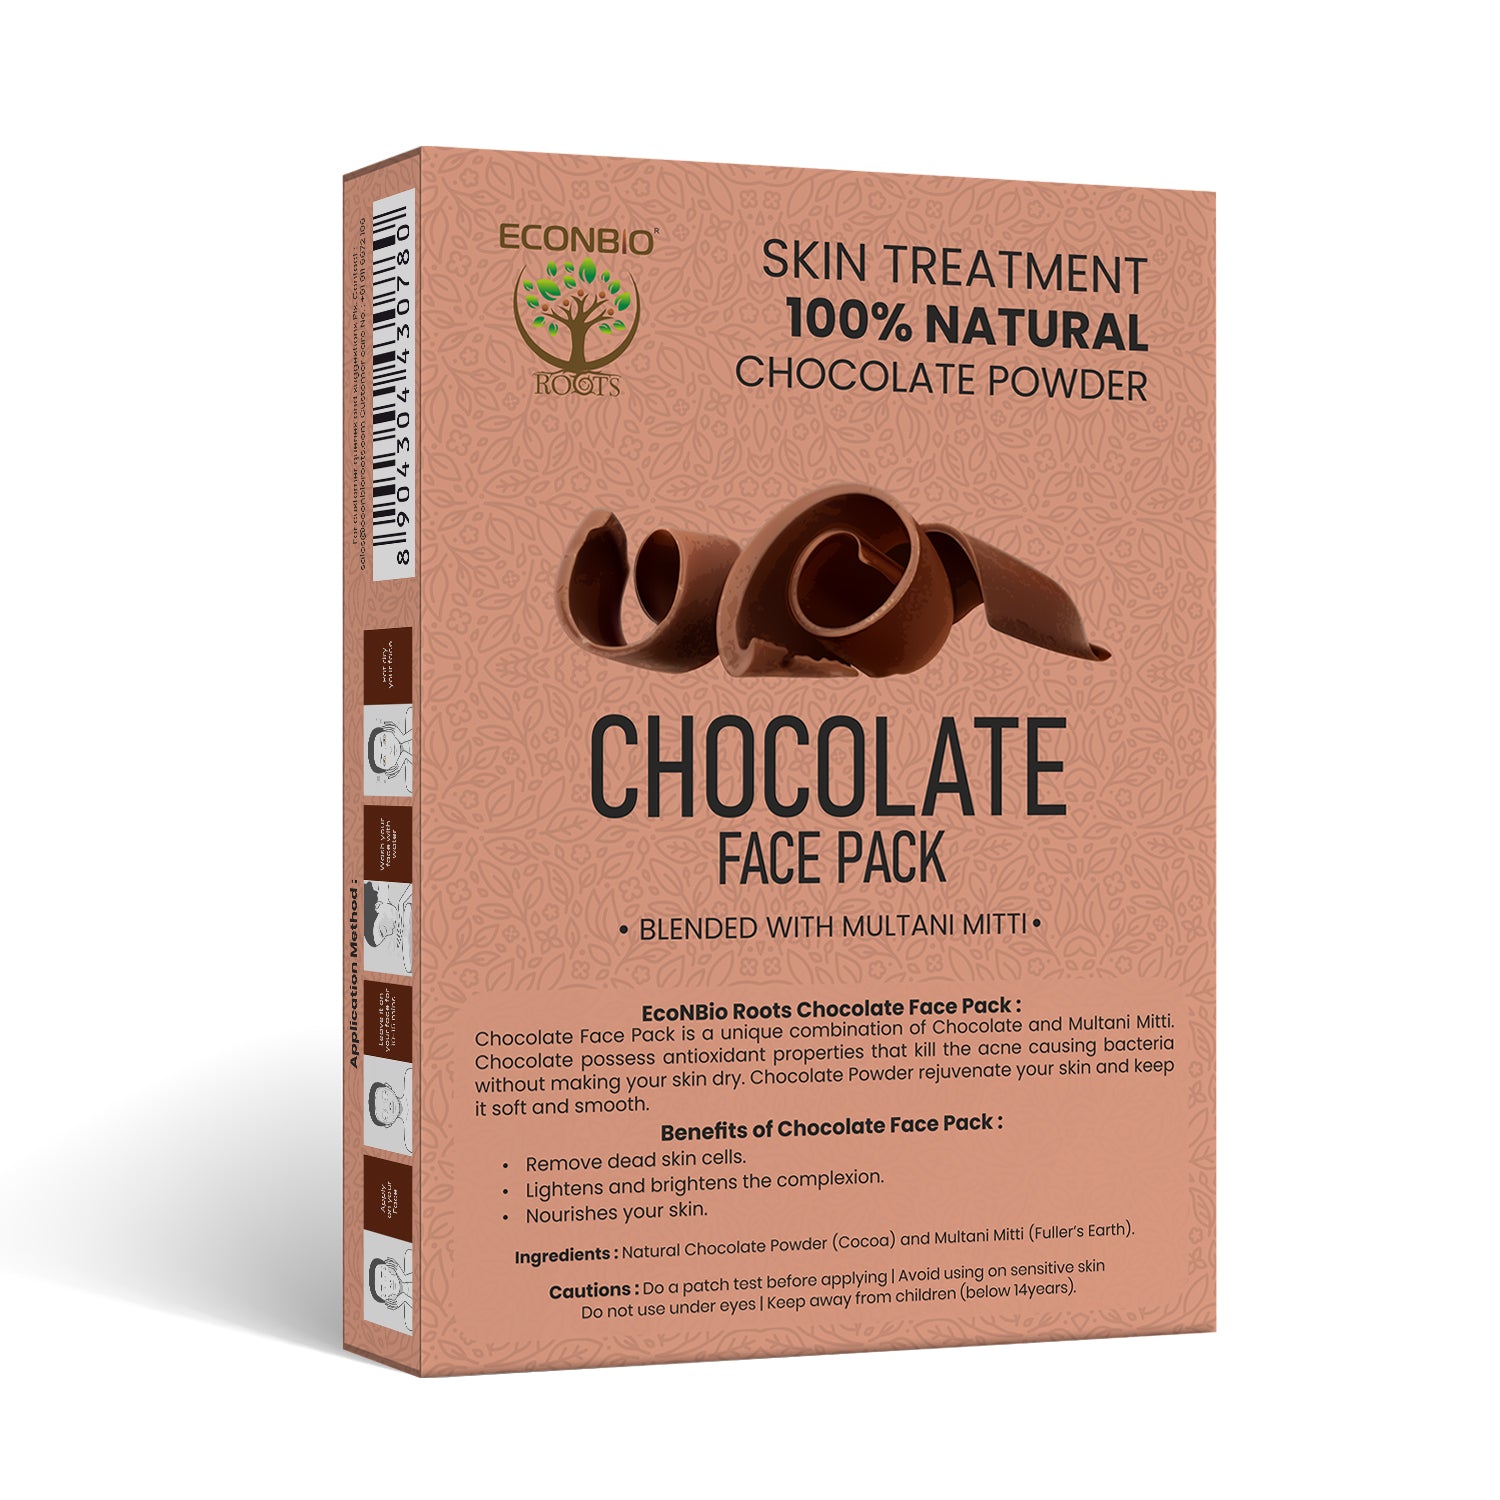 ECONBIO ROOTS 100% Natural Chocolate Face Pack 50g (Pack of 3)